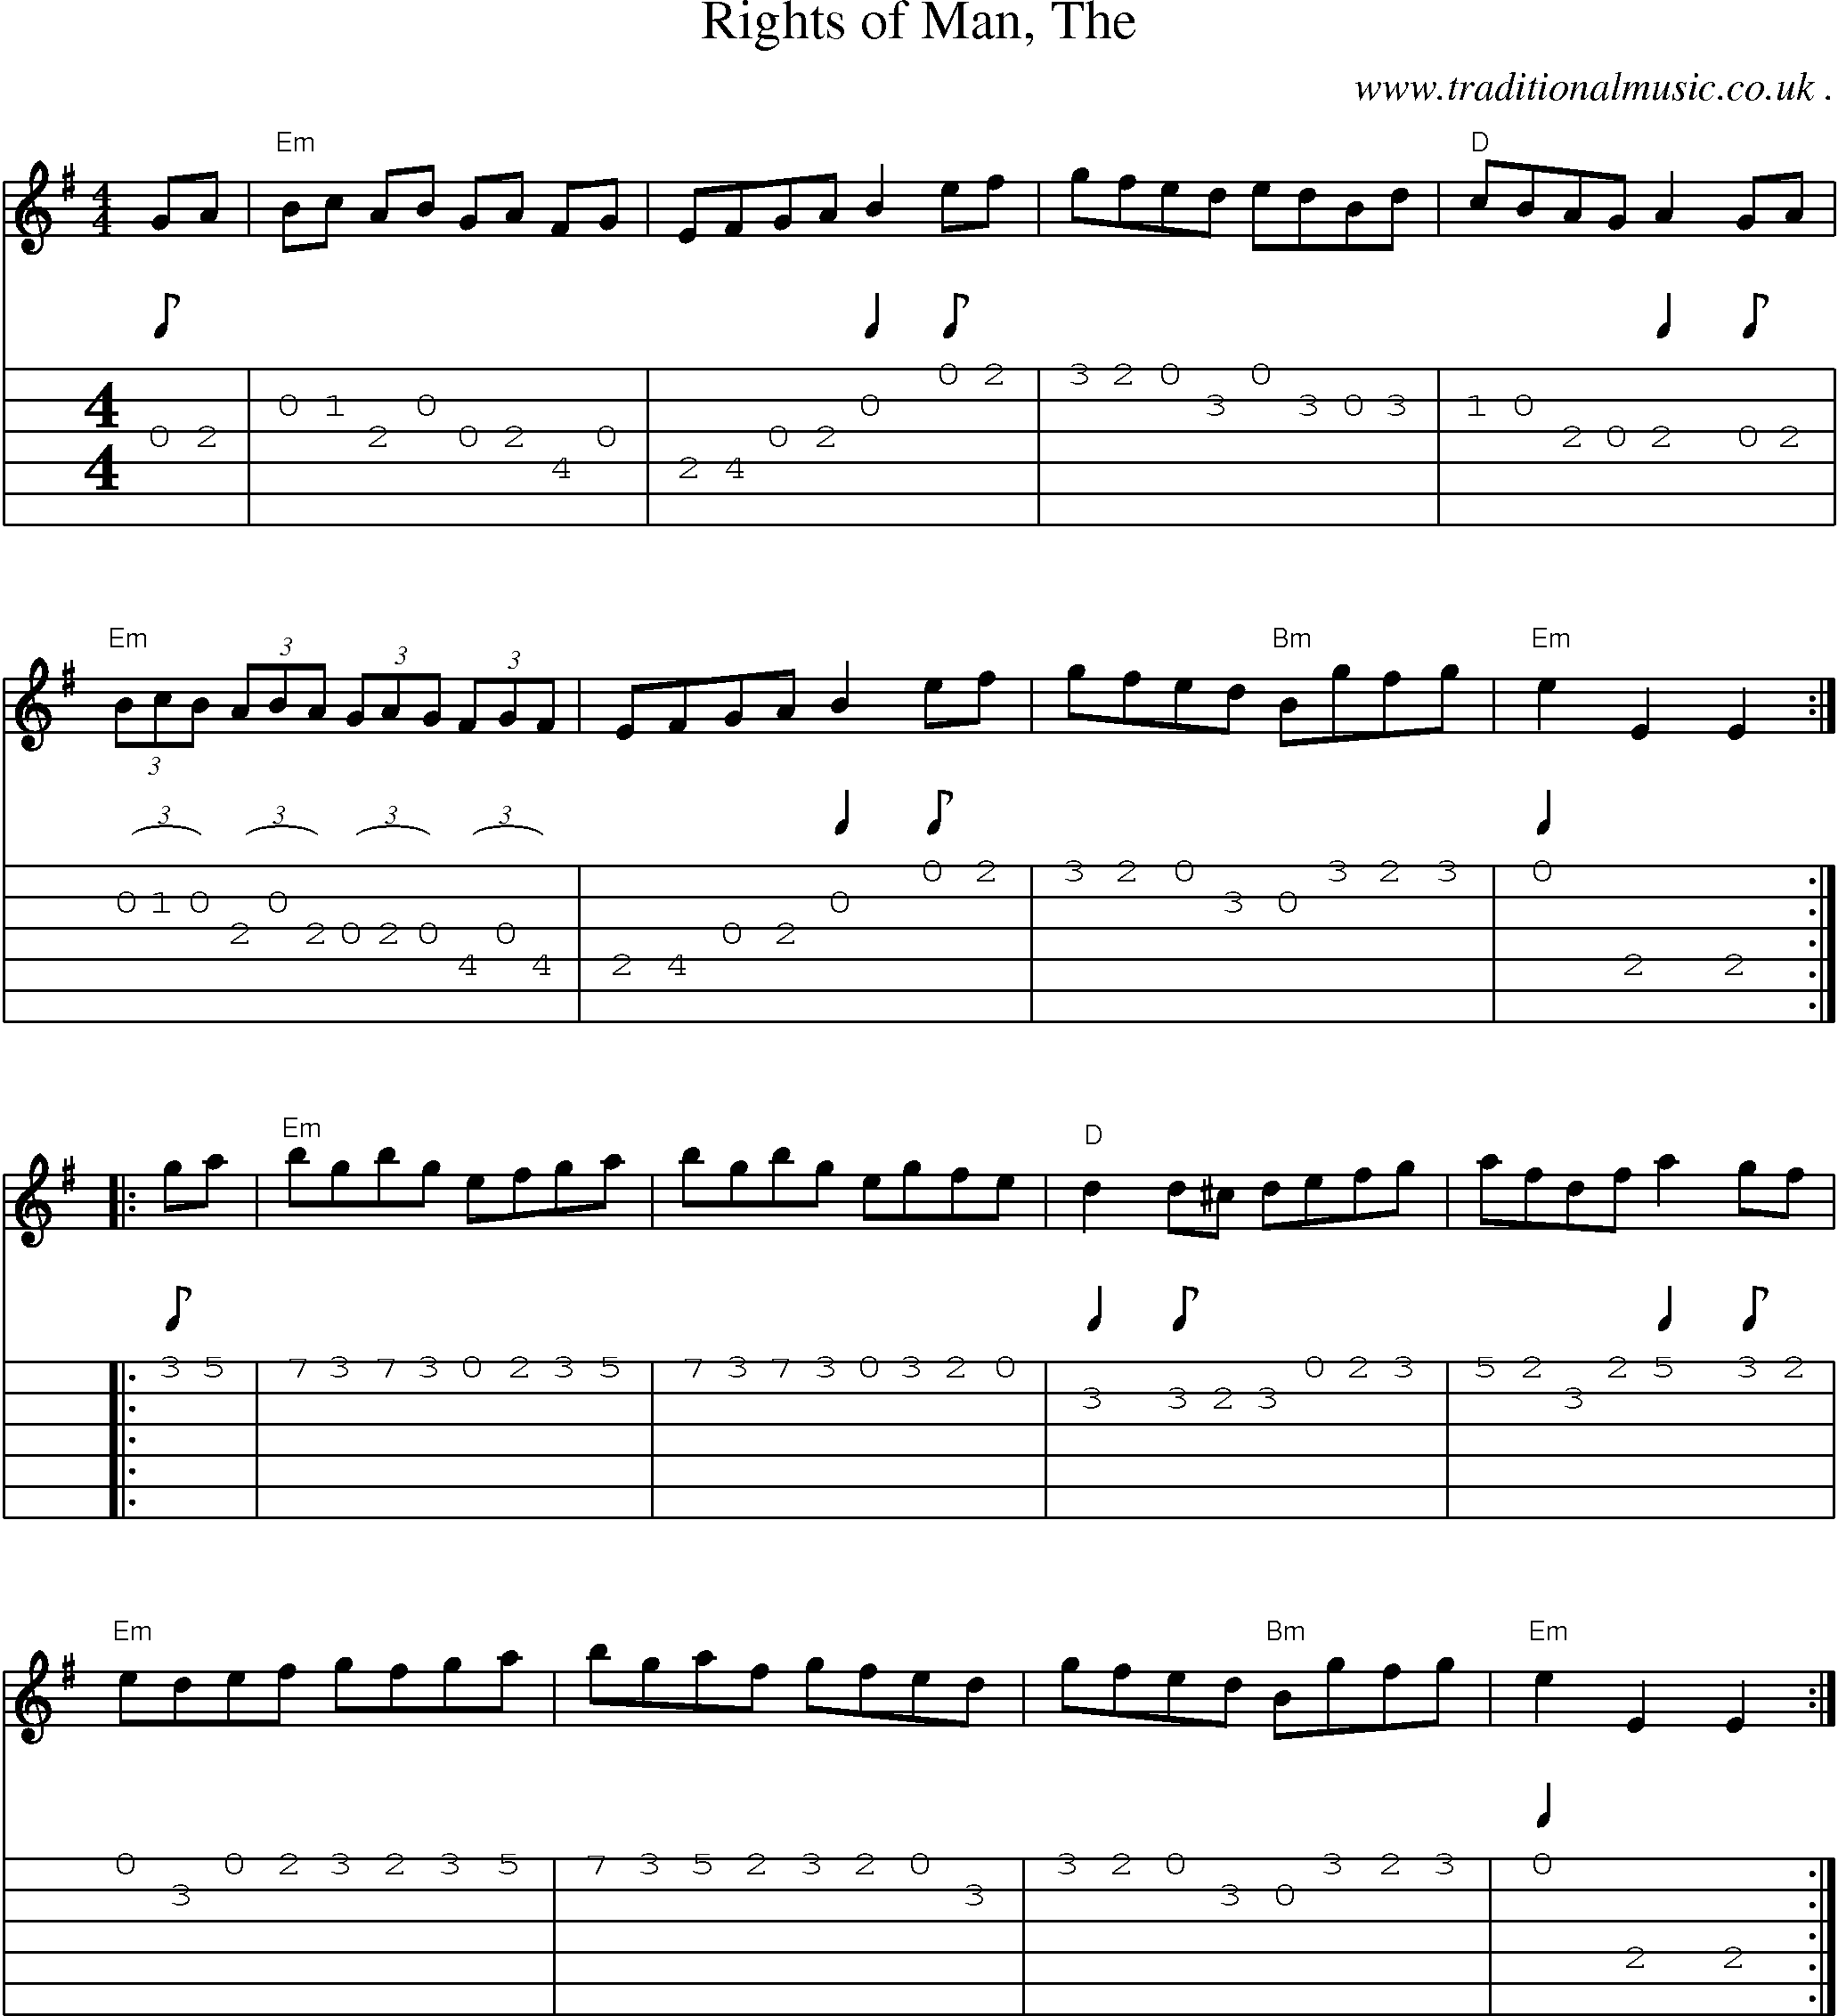 Music Score and Guitar Tabs for Rights of Man The1